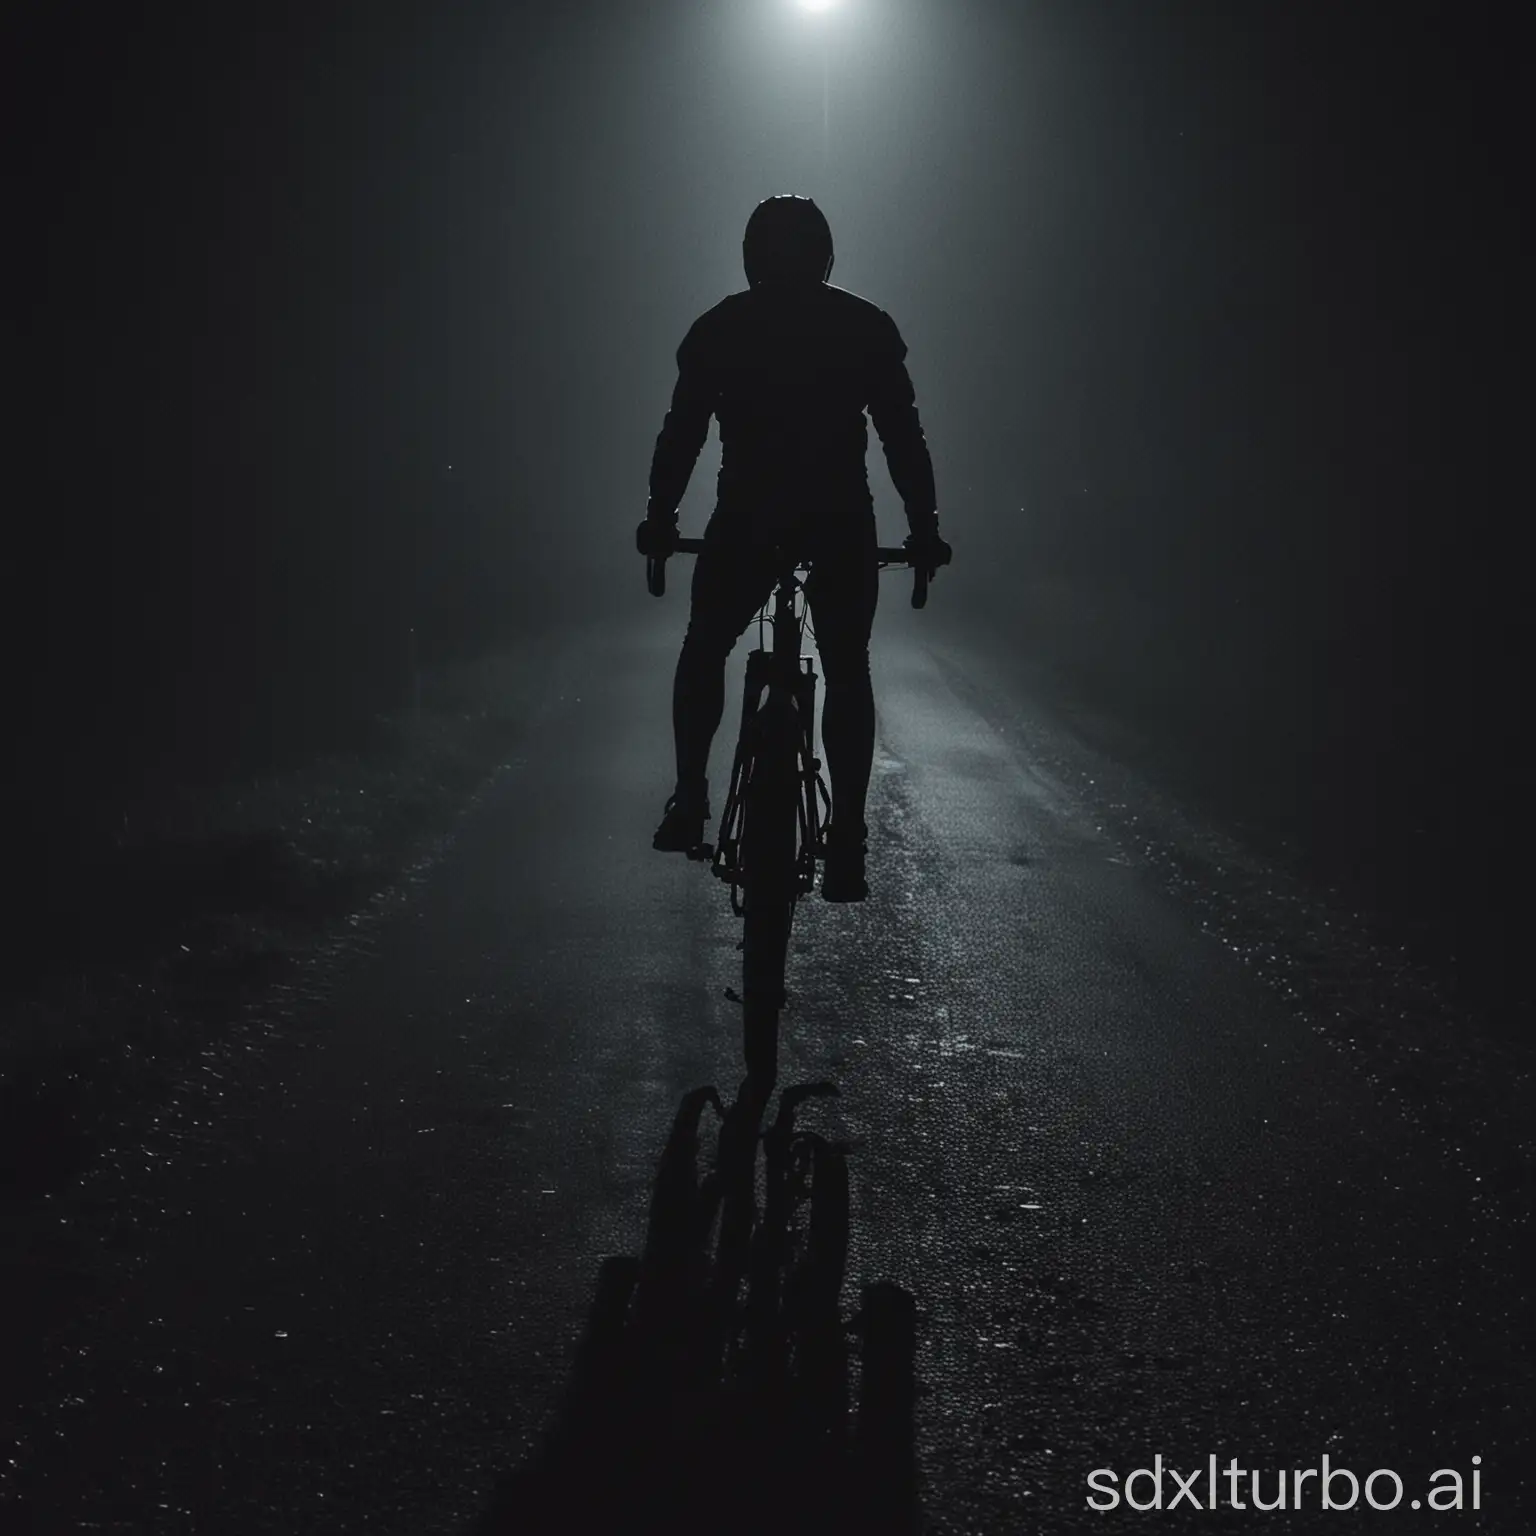 Riding alone in the dark night, chasing the unknown.